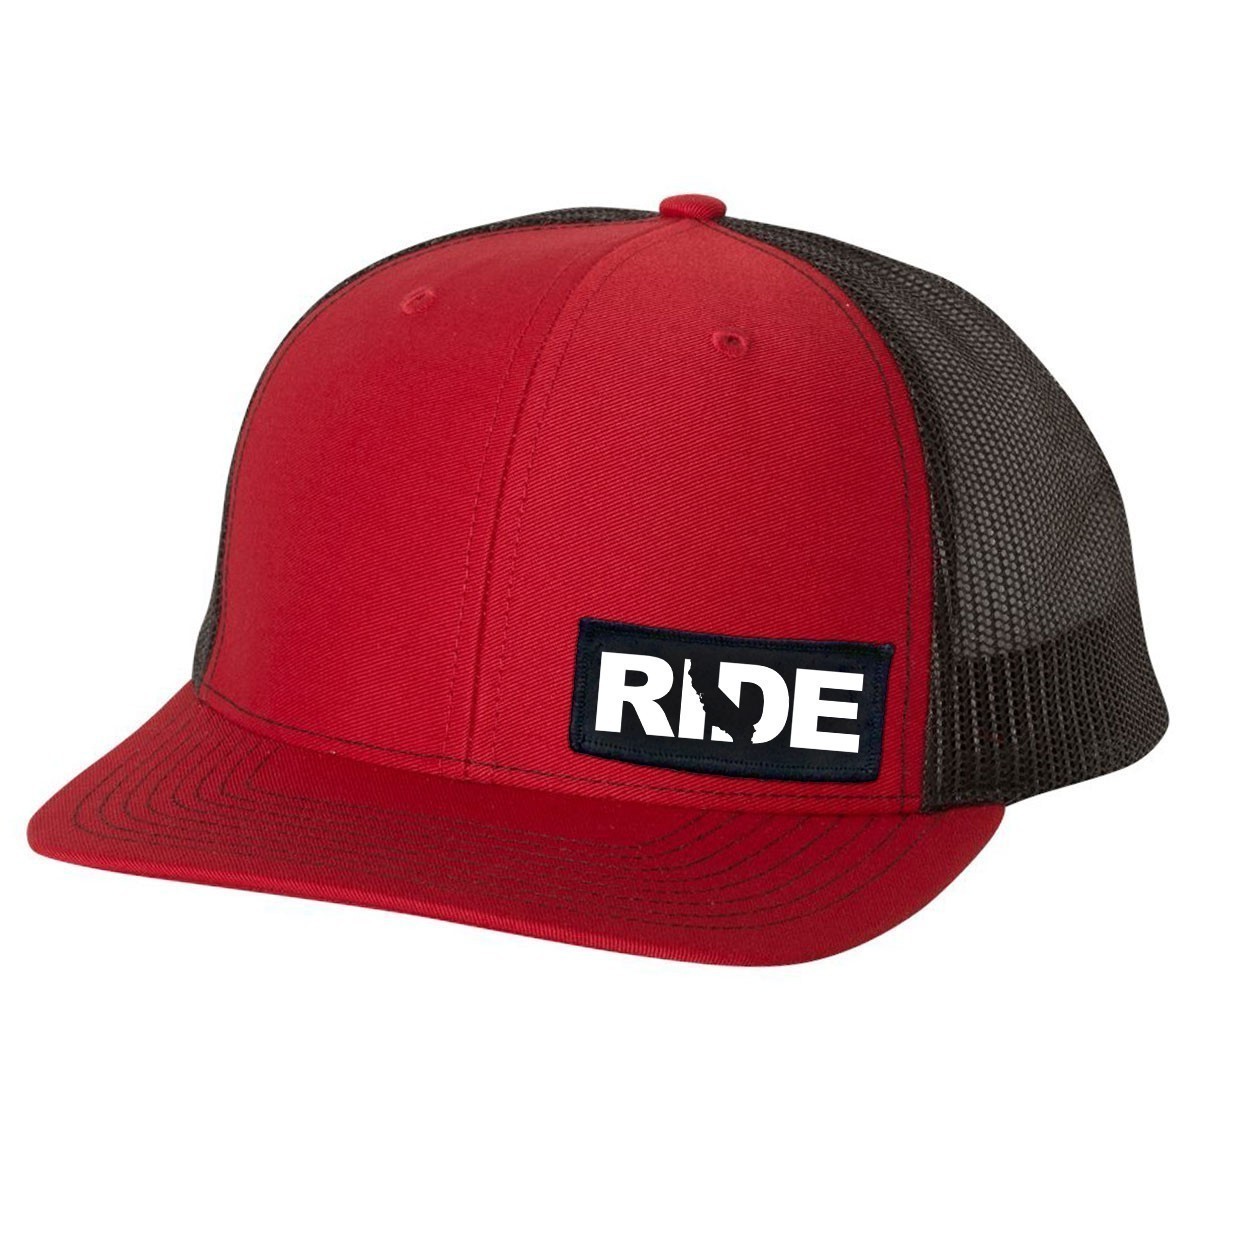 Ride California Night Out Woven Patch Snapback Trucker Hat Red/Black (White Logo)